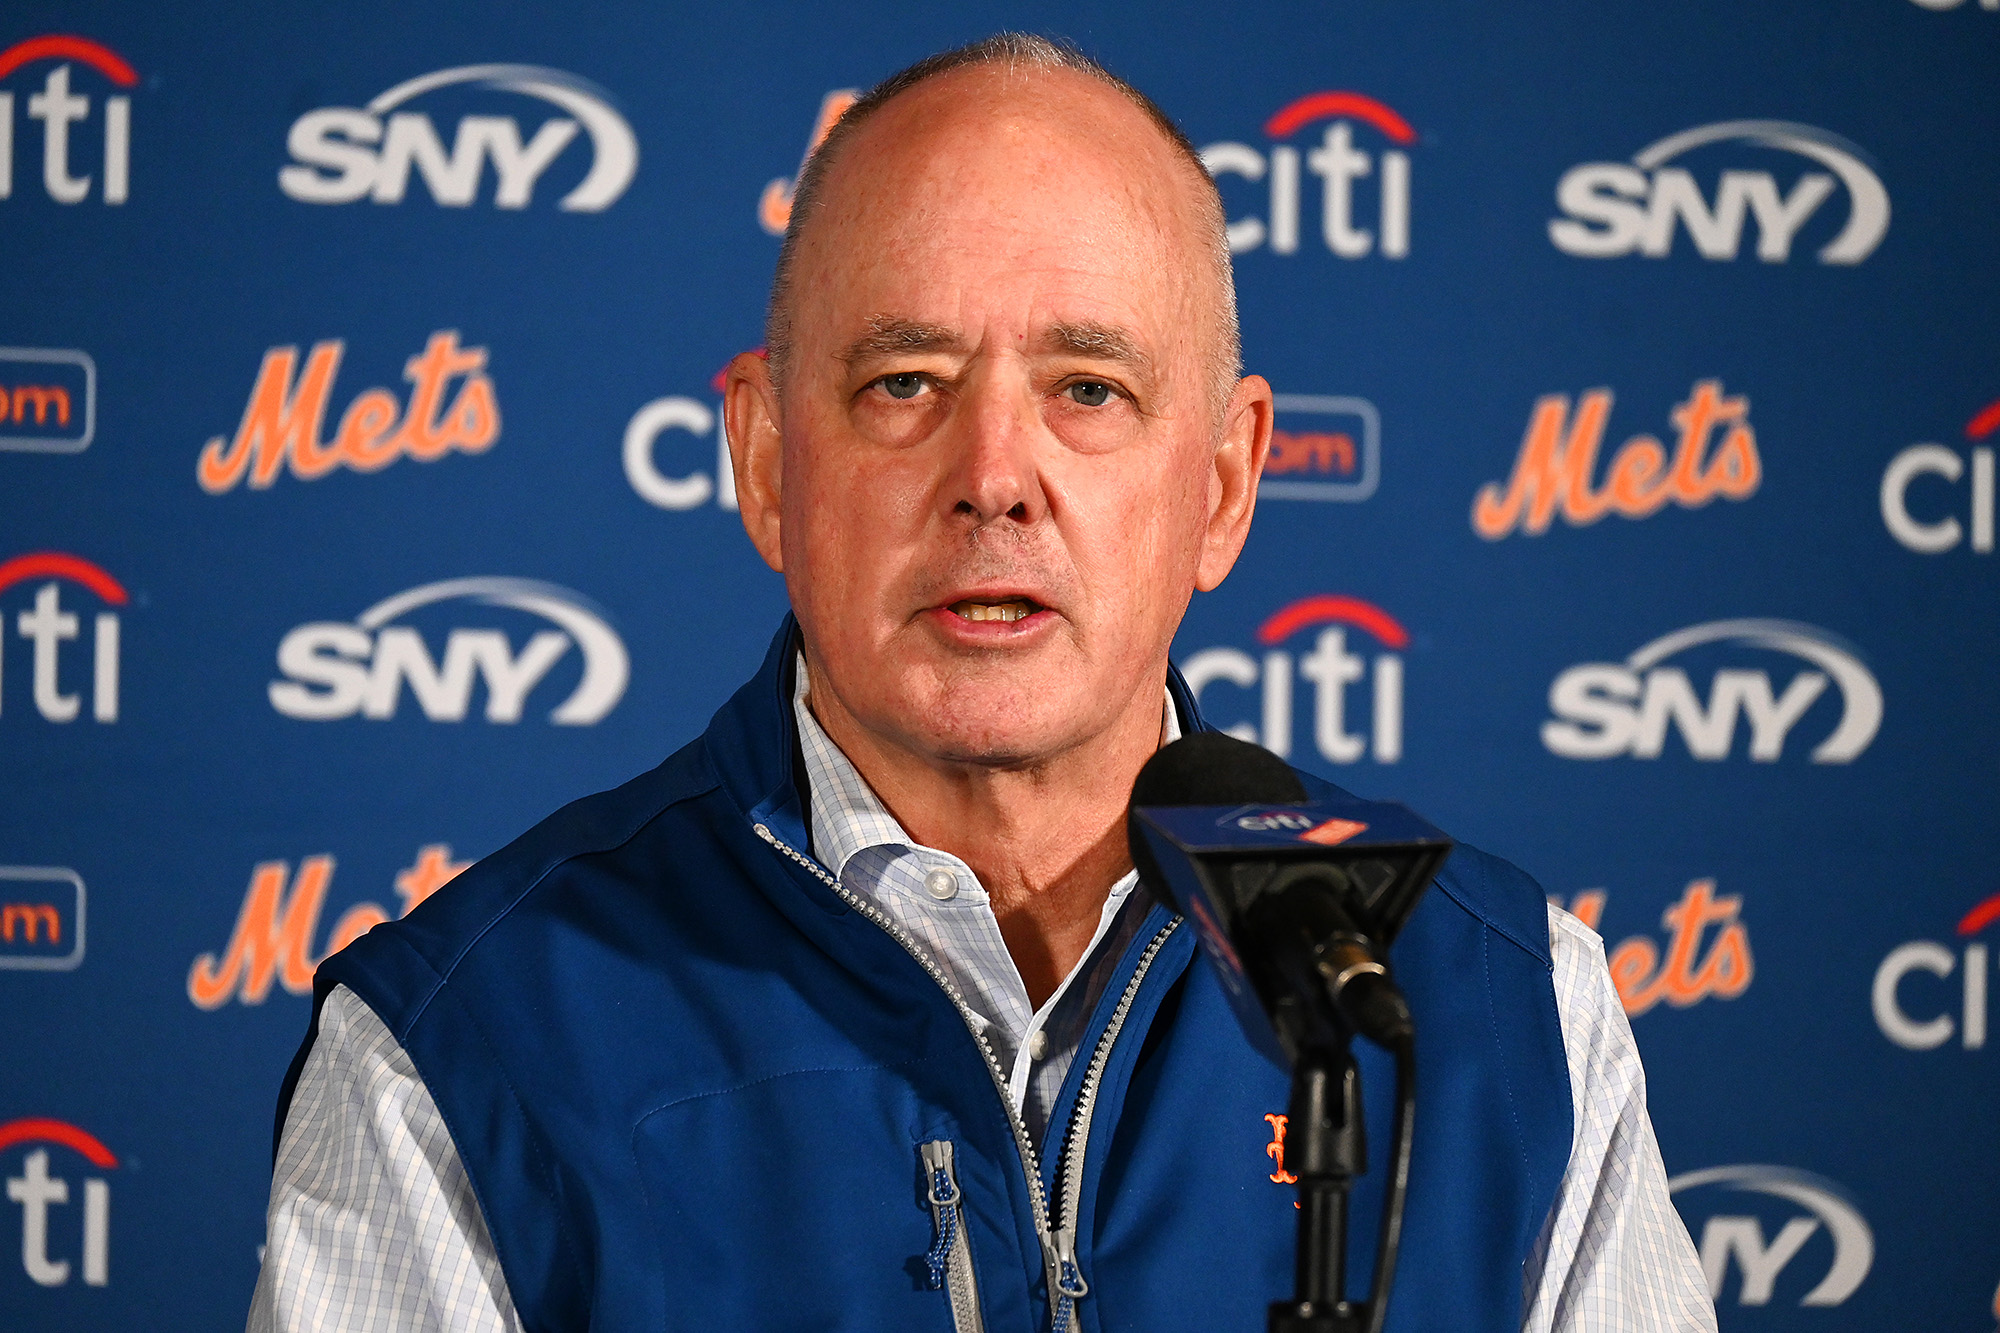 Sandy Alderson's role in the Mets' search for a president of baseball operations is unclear.